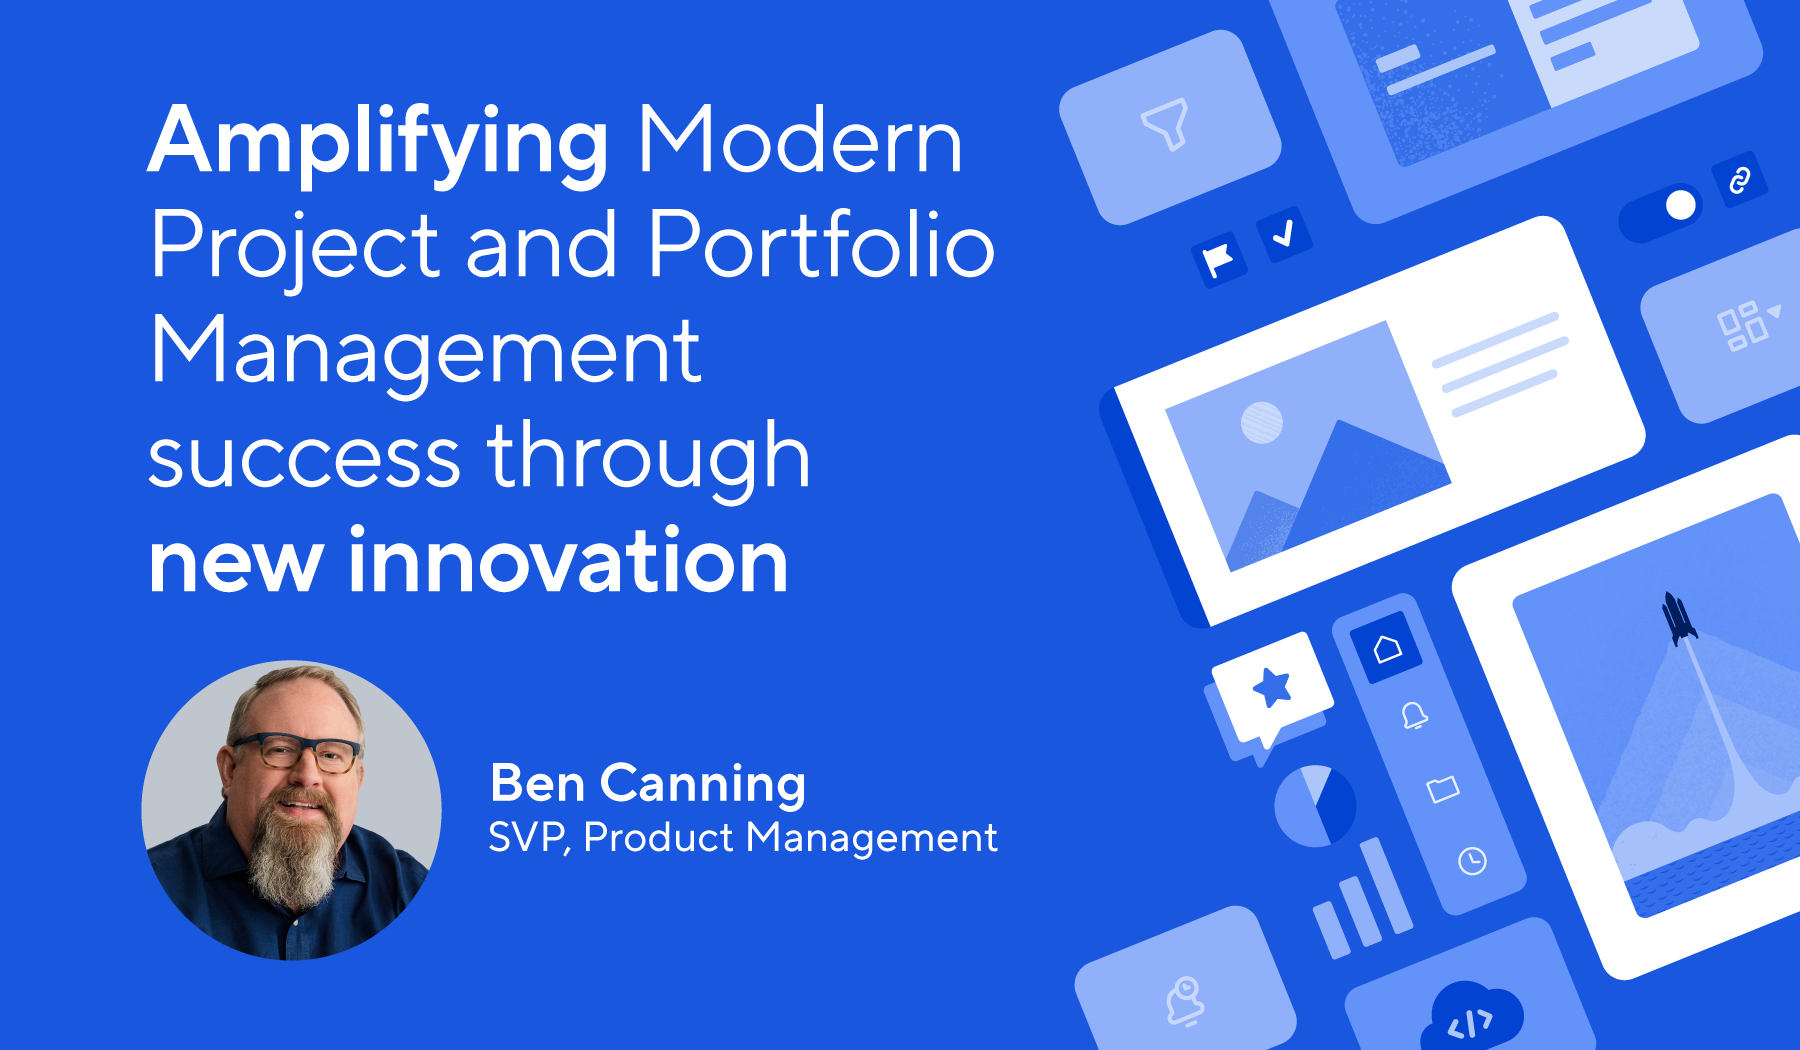 Amplifying Modern Project and Portfolio Management success through new innovation